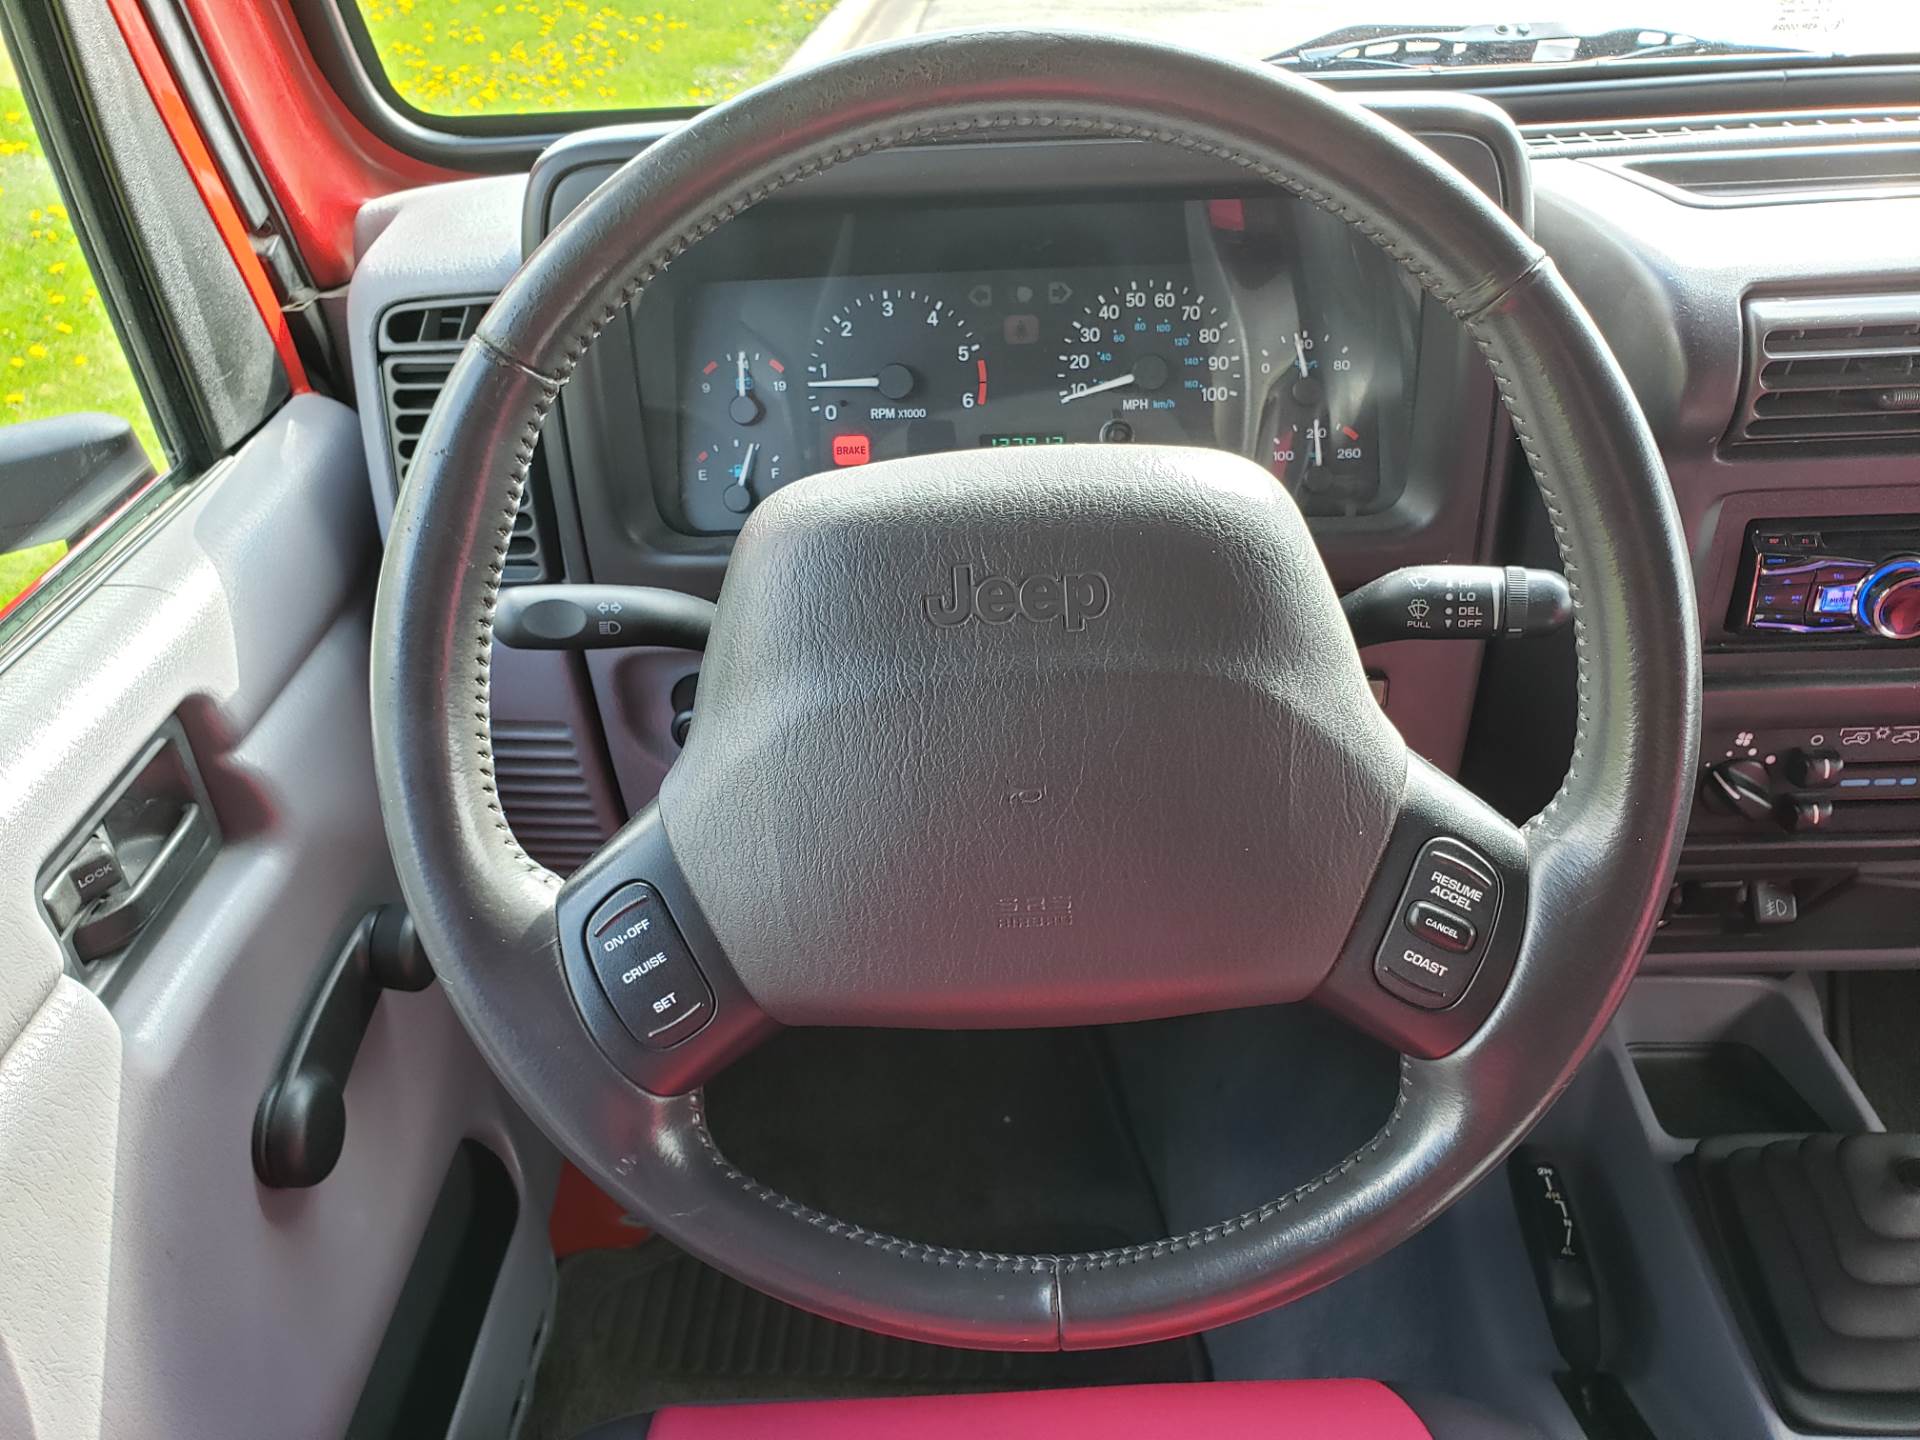 Used 1997 Jeep® Wrangler | Automobile in Big Bend WI | 4023 Flame Red